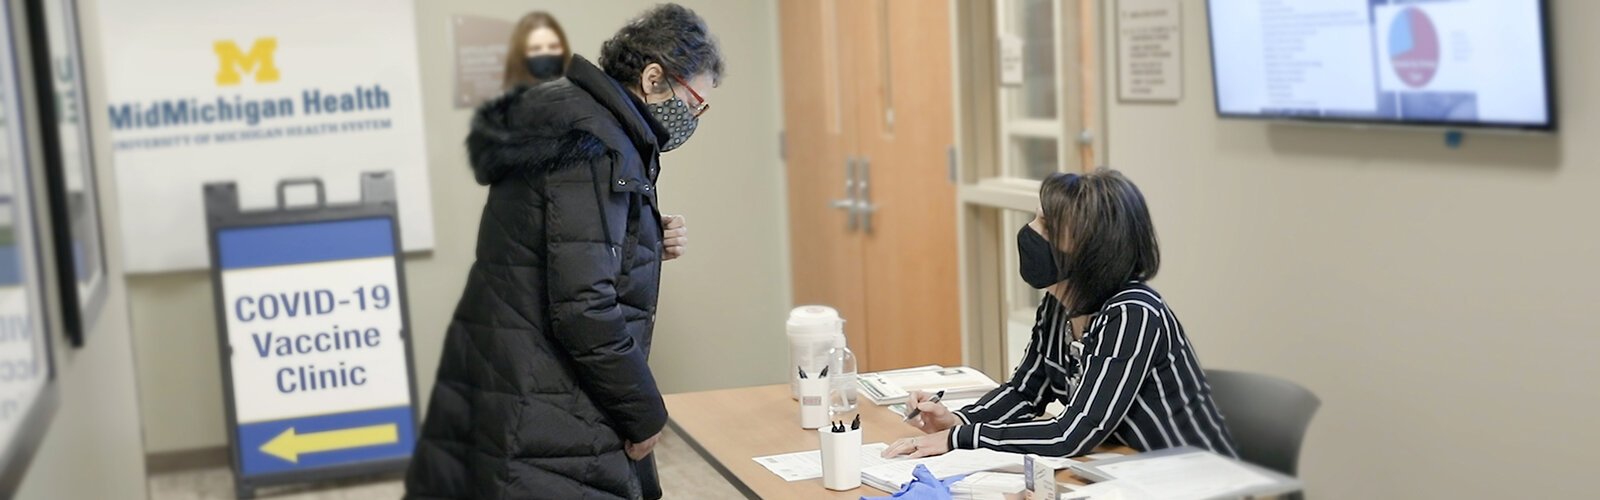 Melanie Kalmar, of Midland, checks in for her COVID-19 vaccine with Melisa McLeod-Blohm, director, MidMichigan Physicians Group, at a recent vaccination clinic.